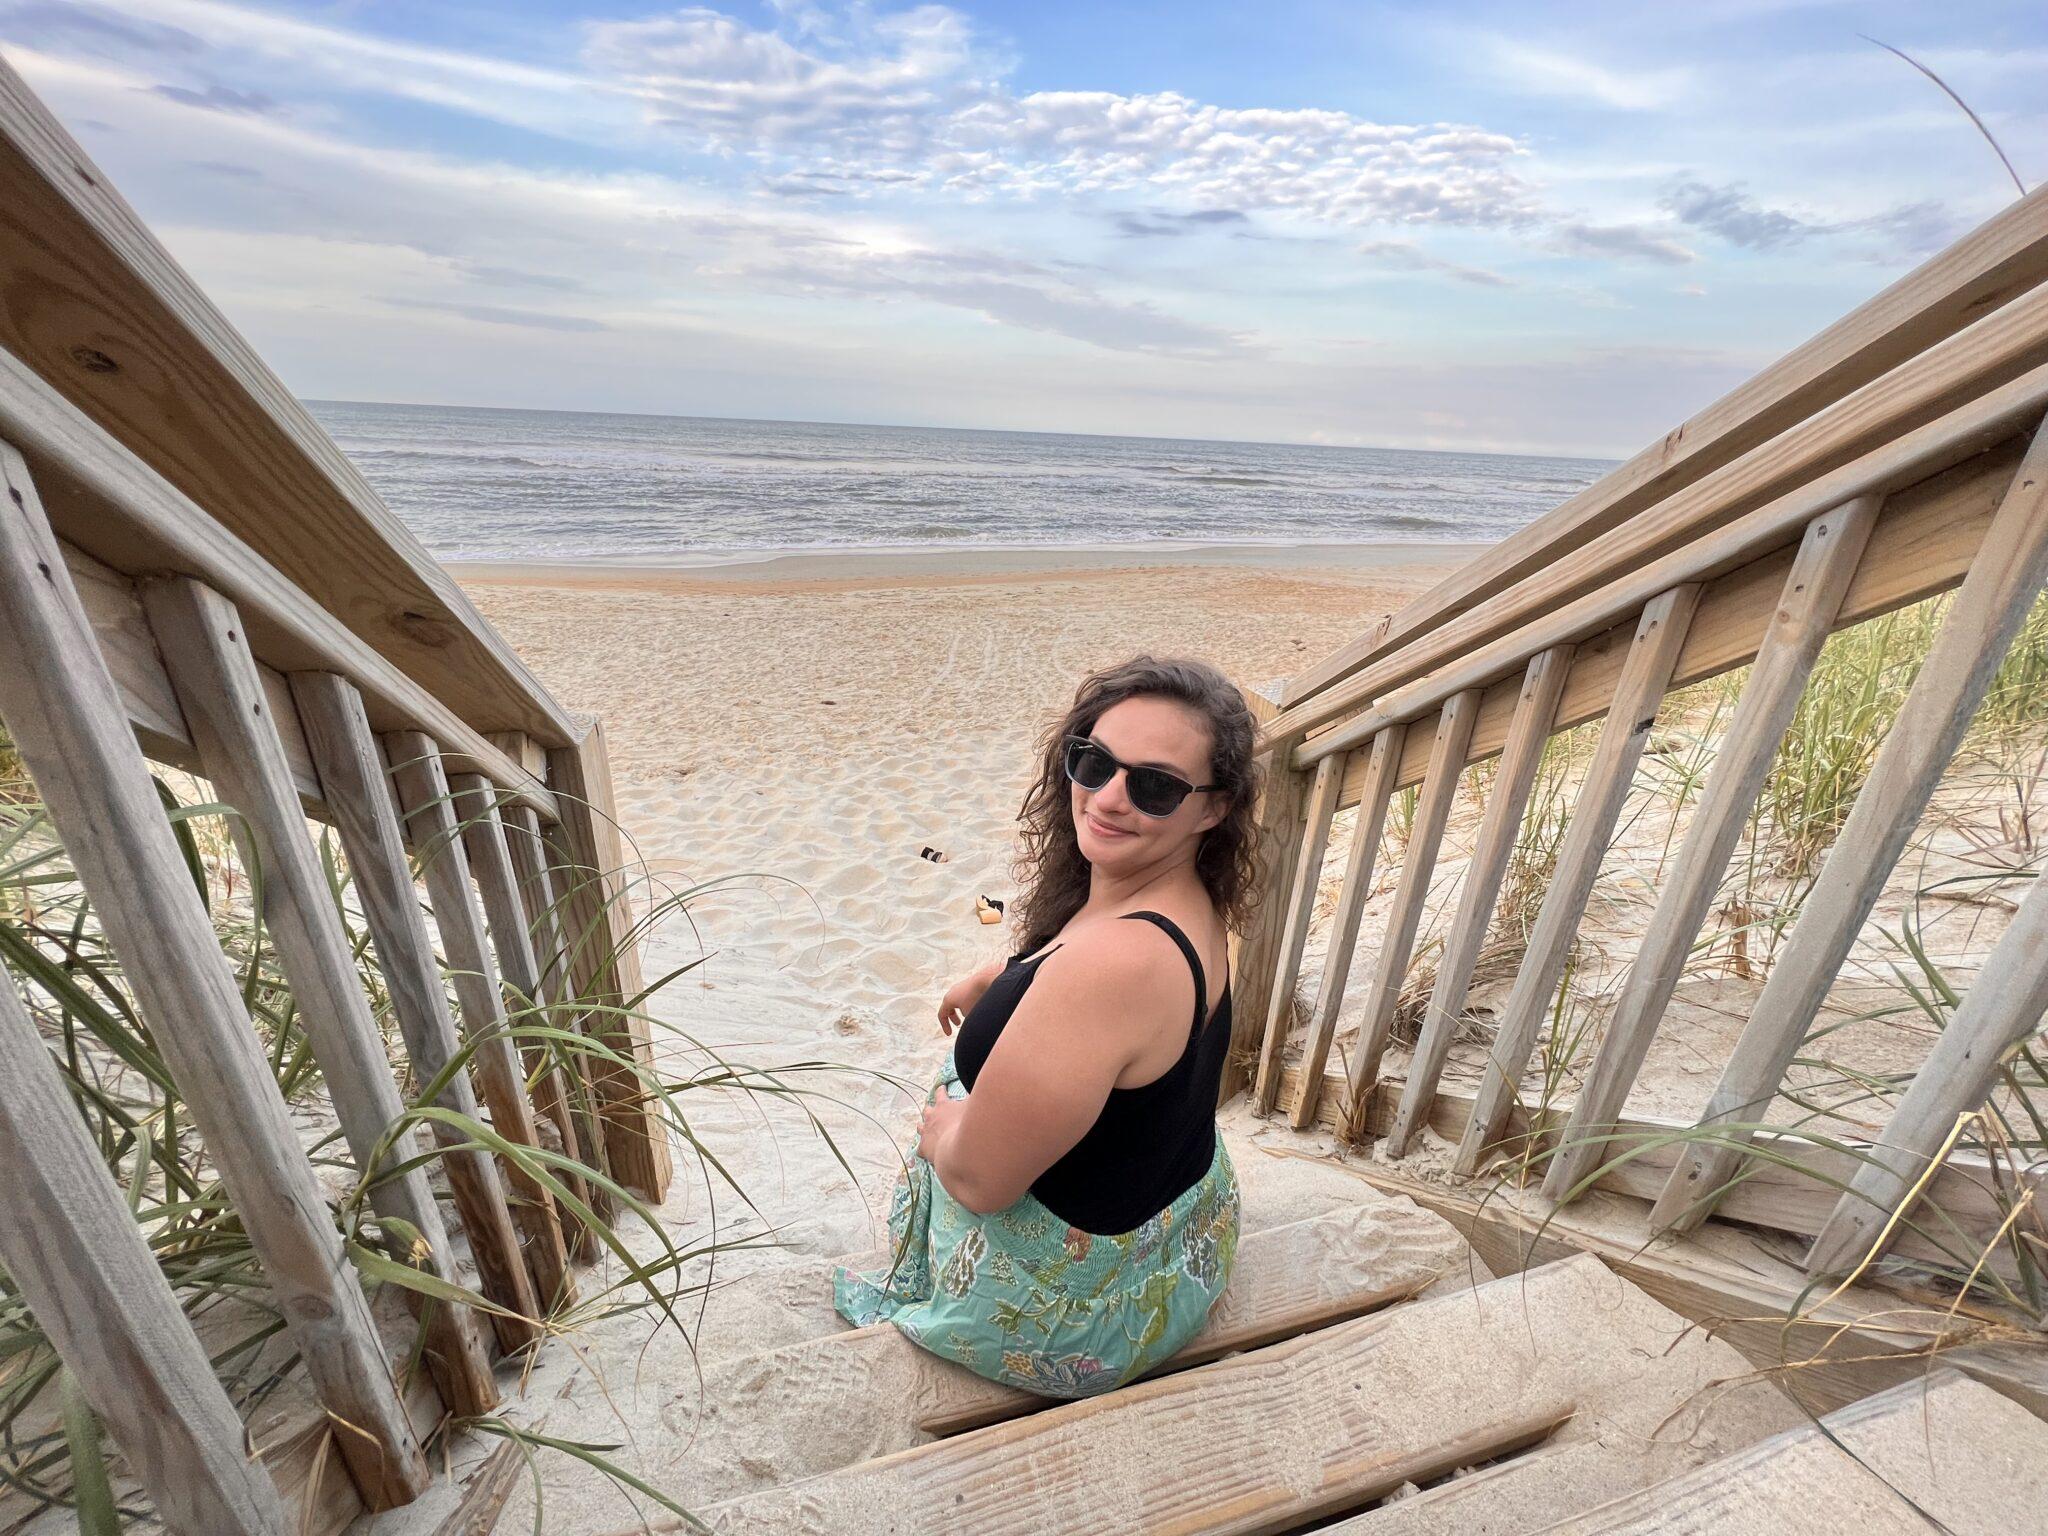 S’mores & Extra: A Assessment of the Sanderling Resort within the Outer Banks, North Carolina